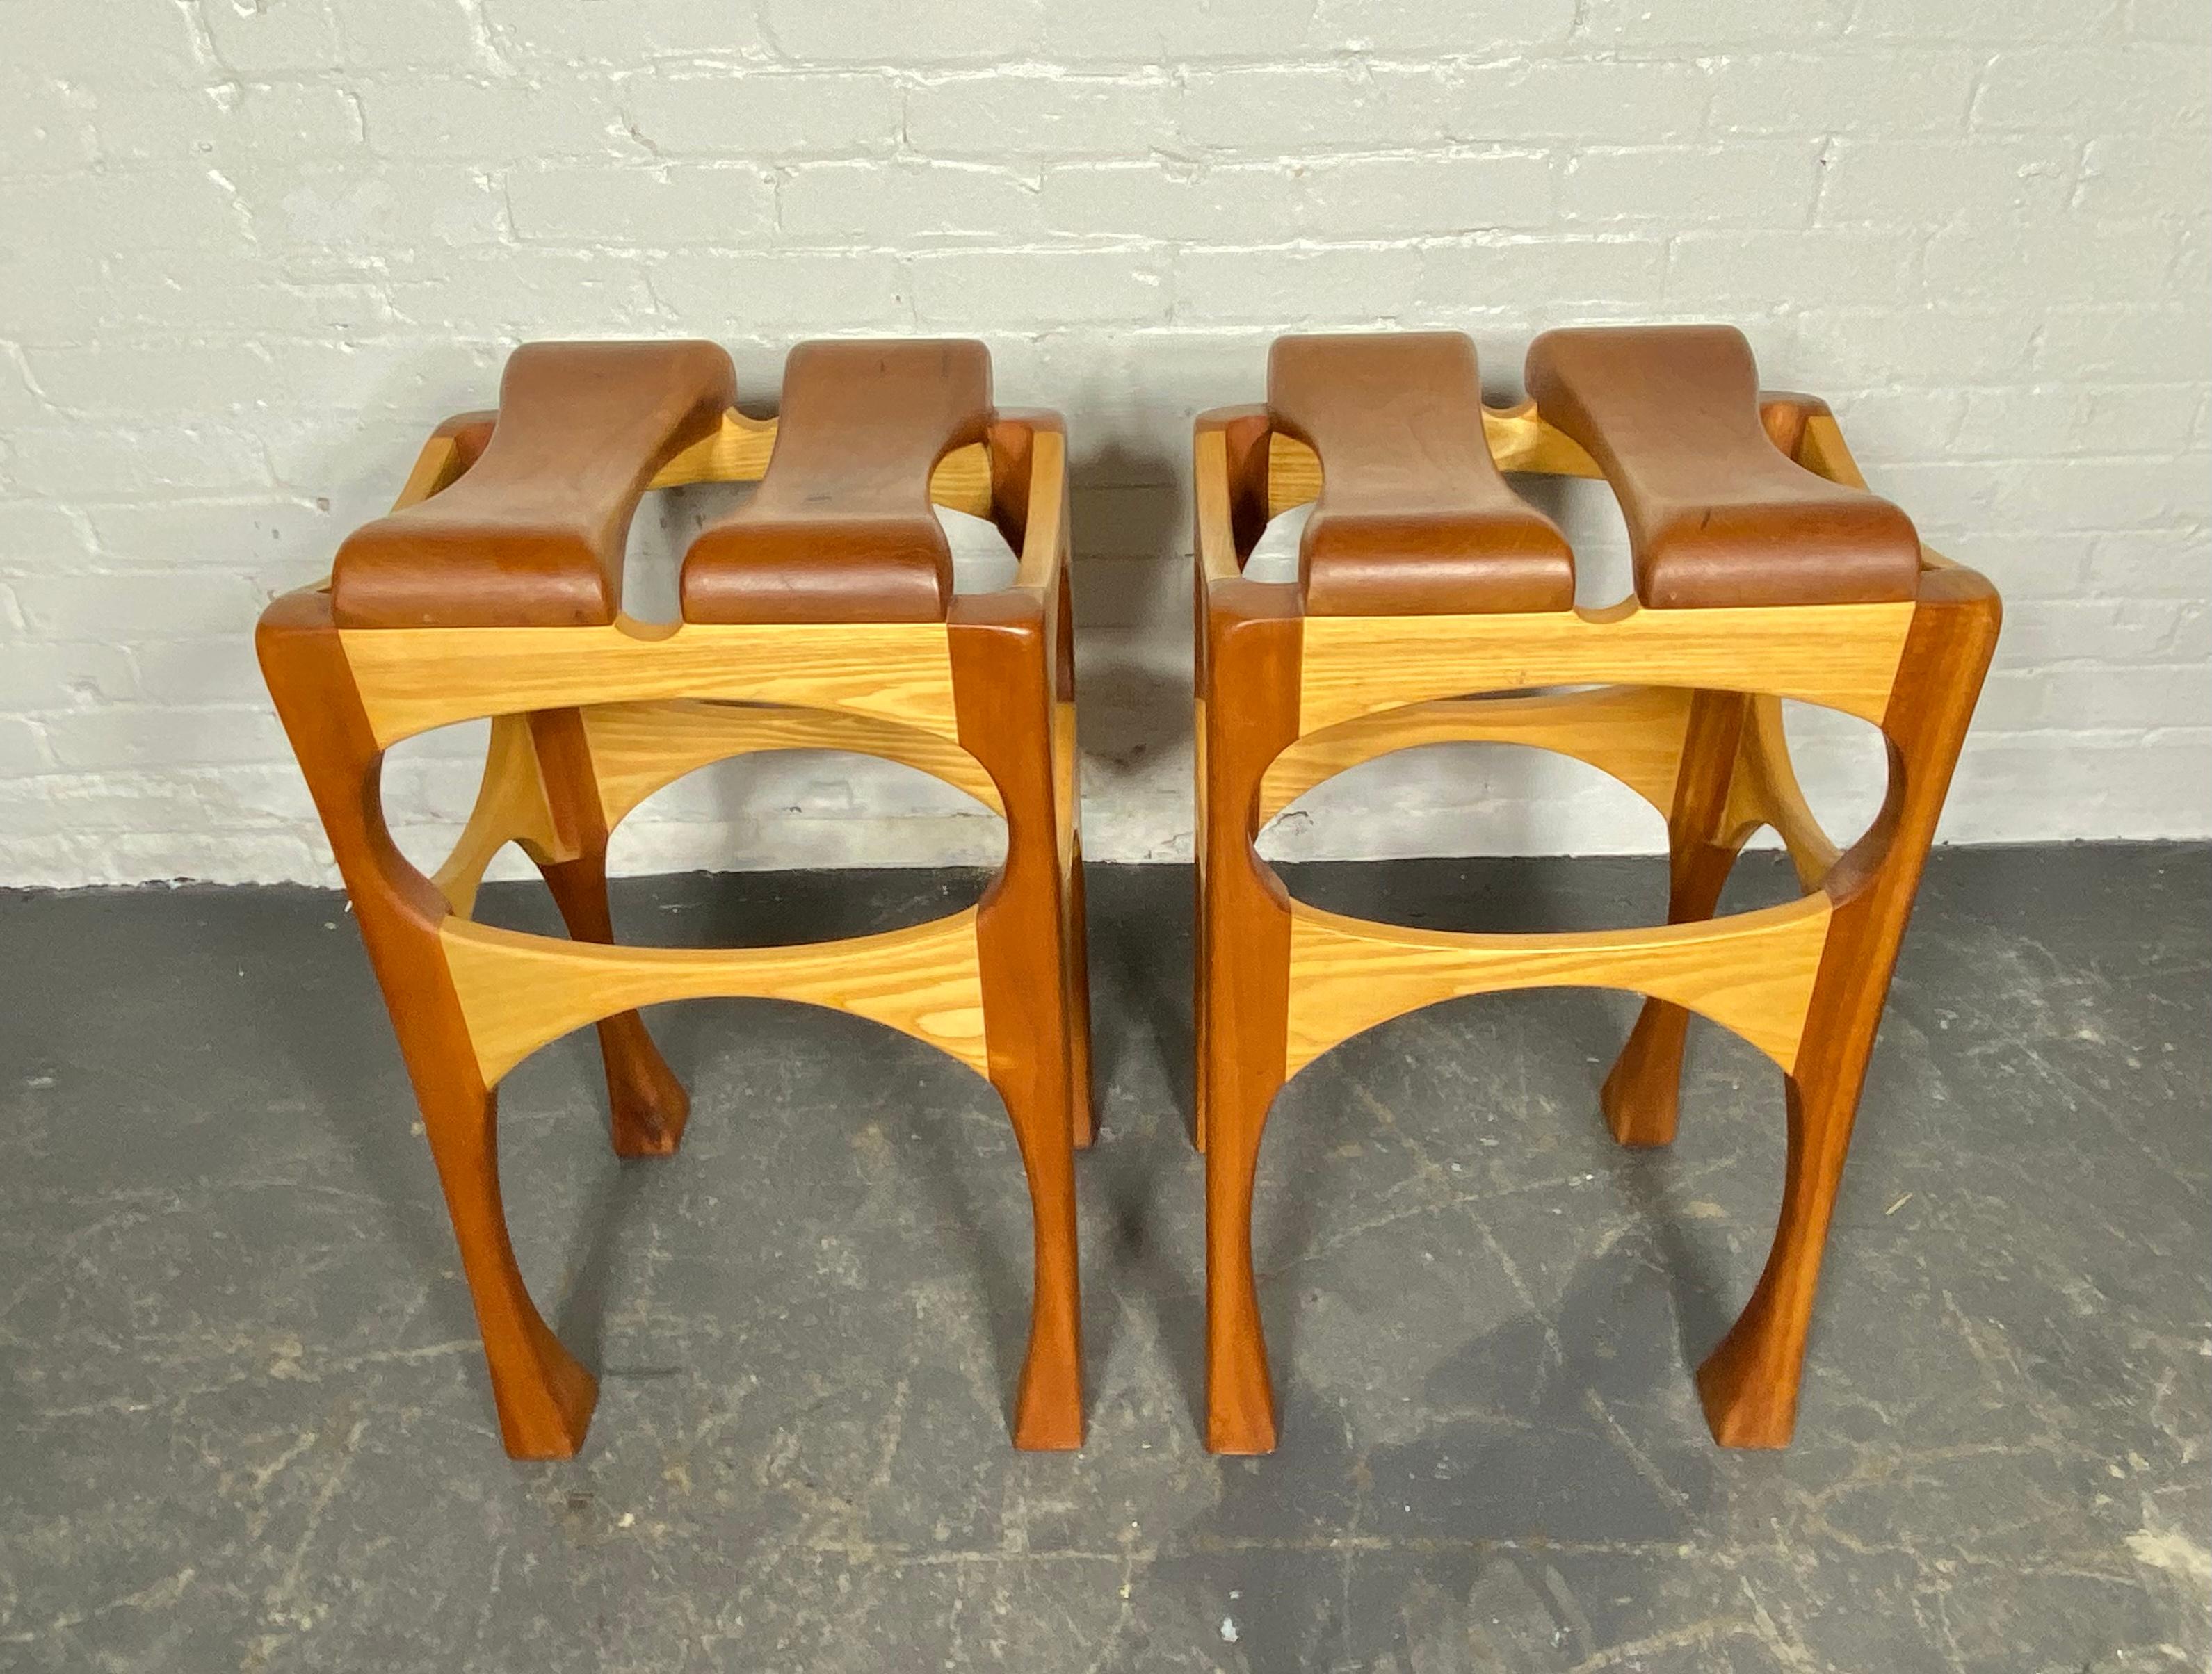 Hand Crafted Bespoke Workshop/Studio Stools.  2-tone birch and cherry  In Excellent Condition For Sale In Buffalo, NY